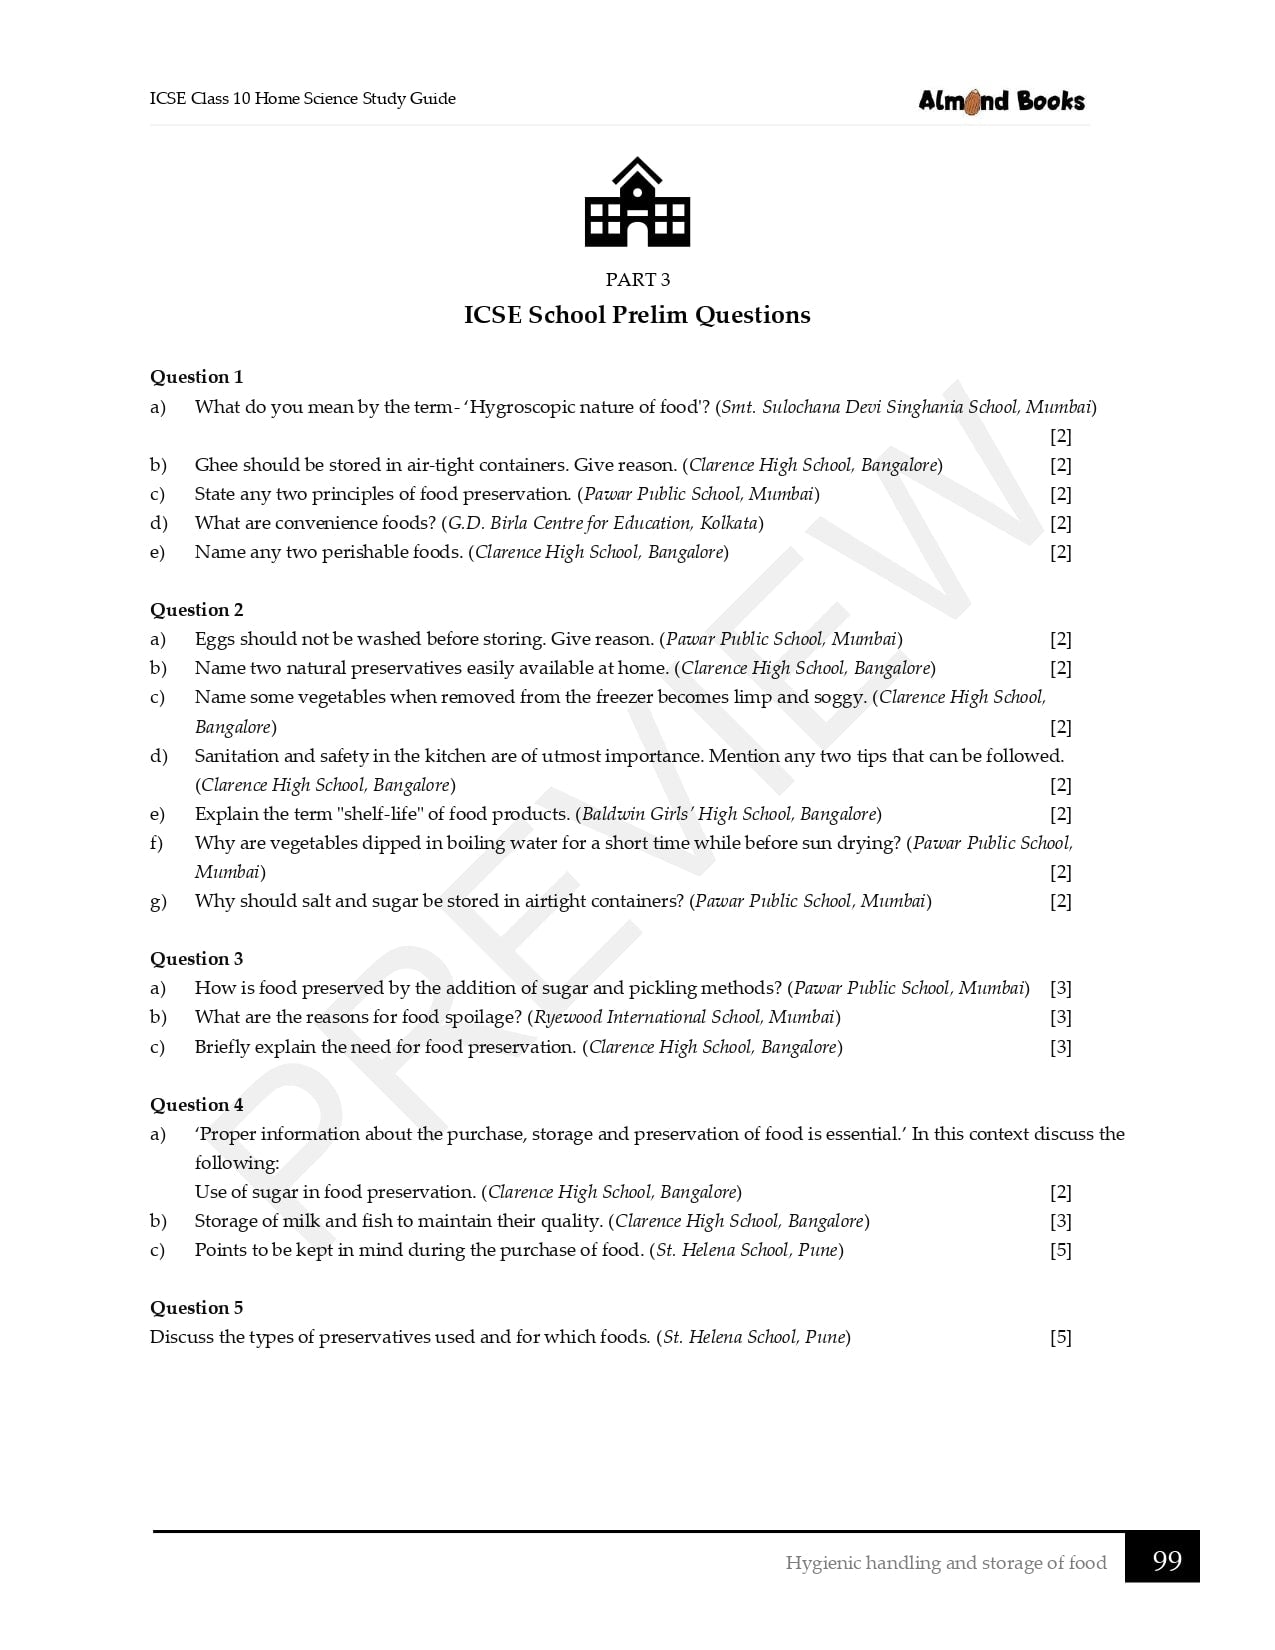 ICSE Home Science Worksheets for Class 10